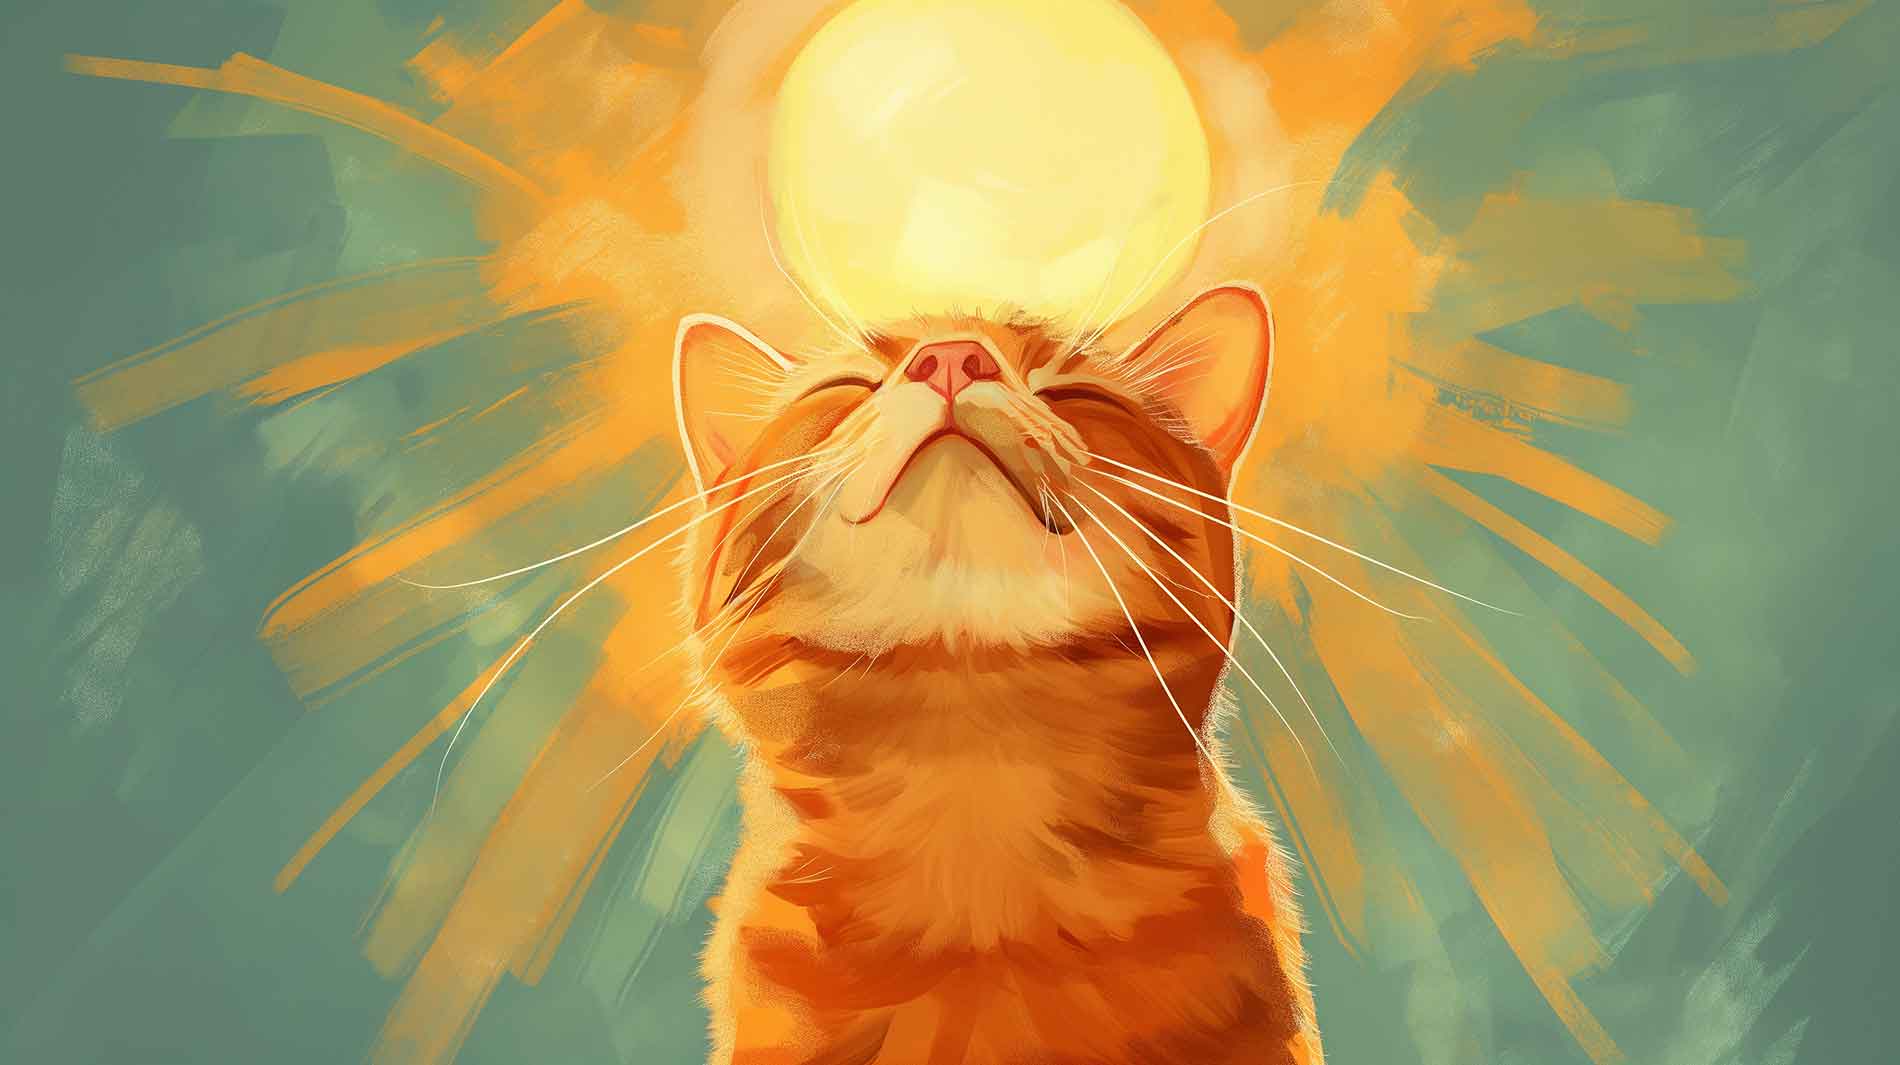 illustration of a cat in front of the sun